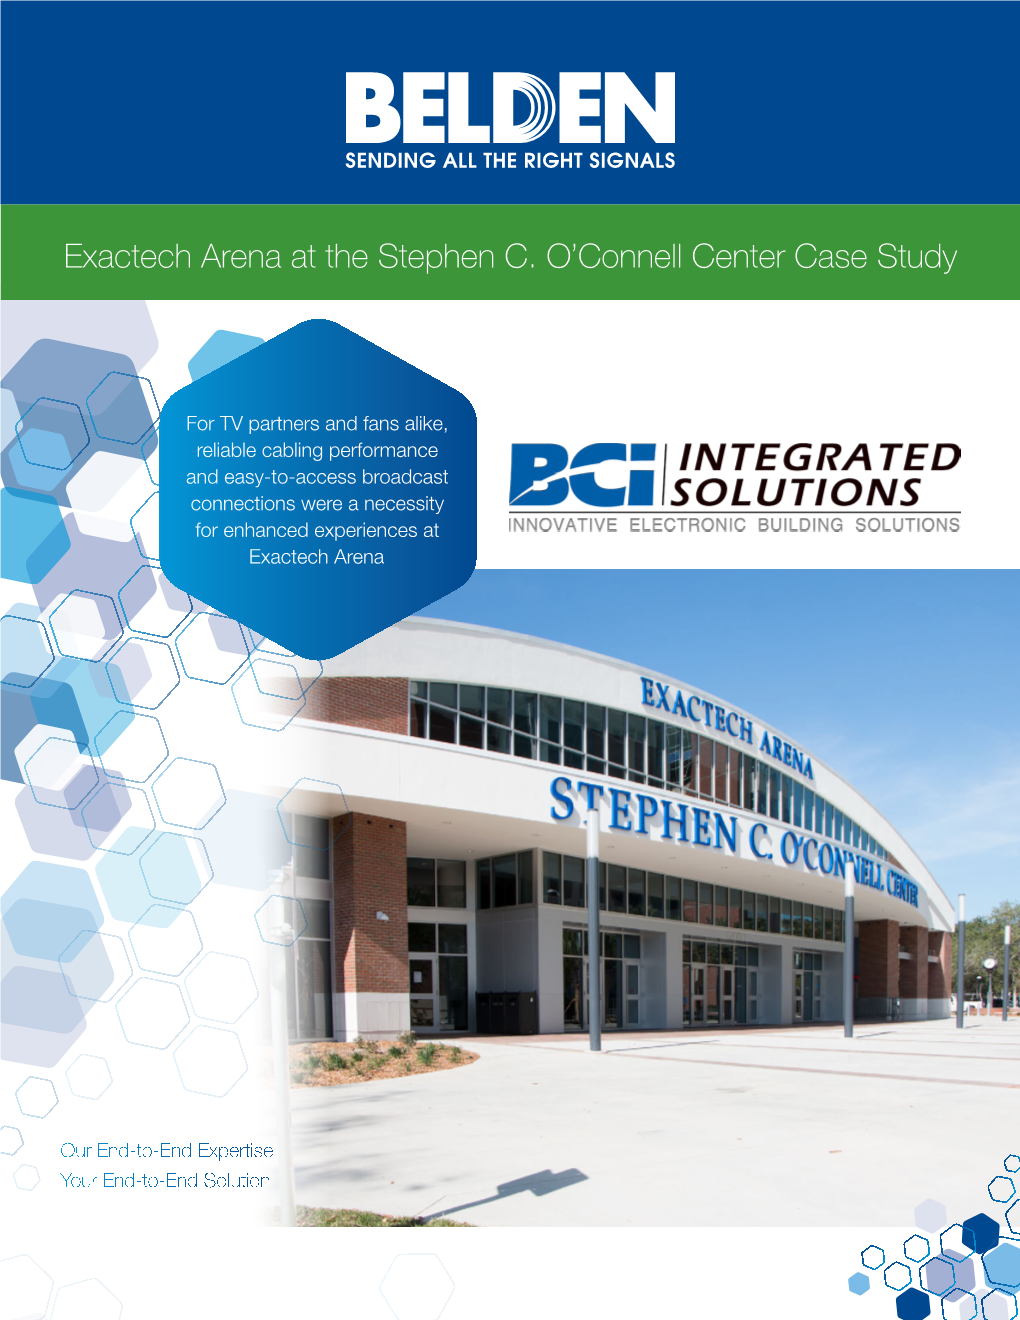 Exactech Arena at the Stephen C. O'connell Center Case Study